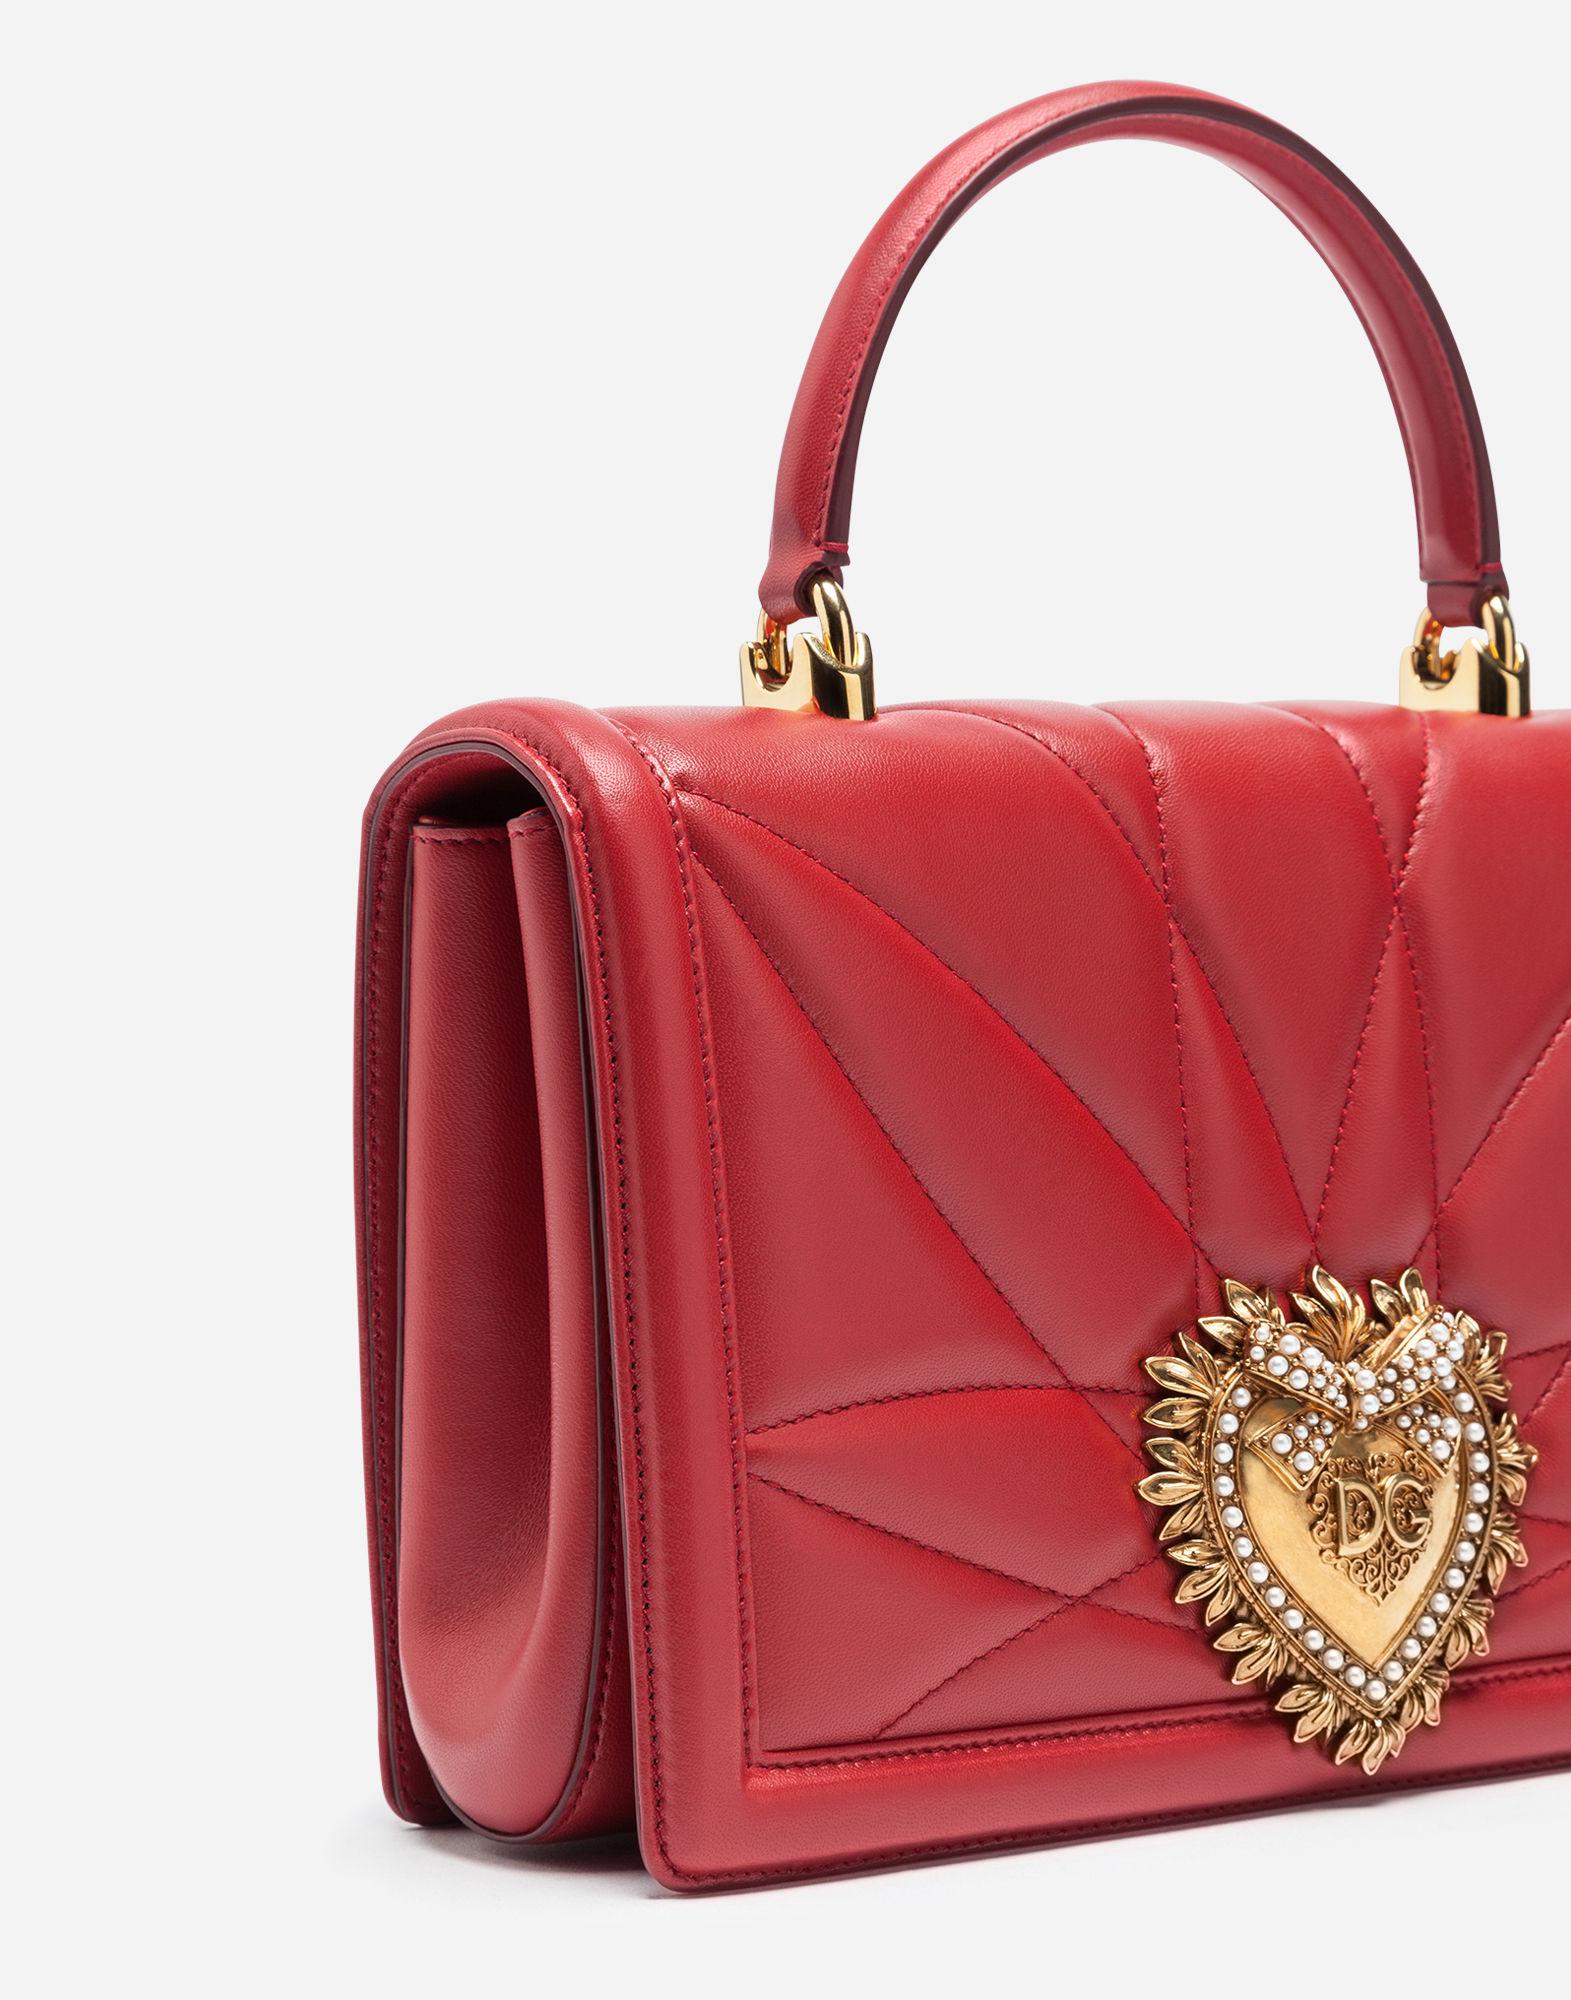 Dolce & Gabbana Large Devotion Bag In Quilted Nappa Leather in Red - Lyst